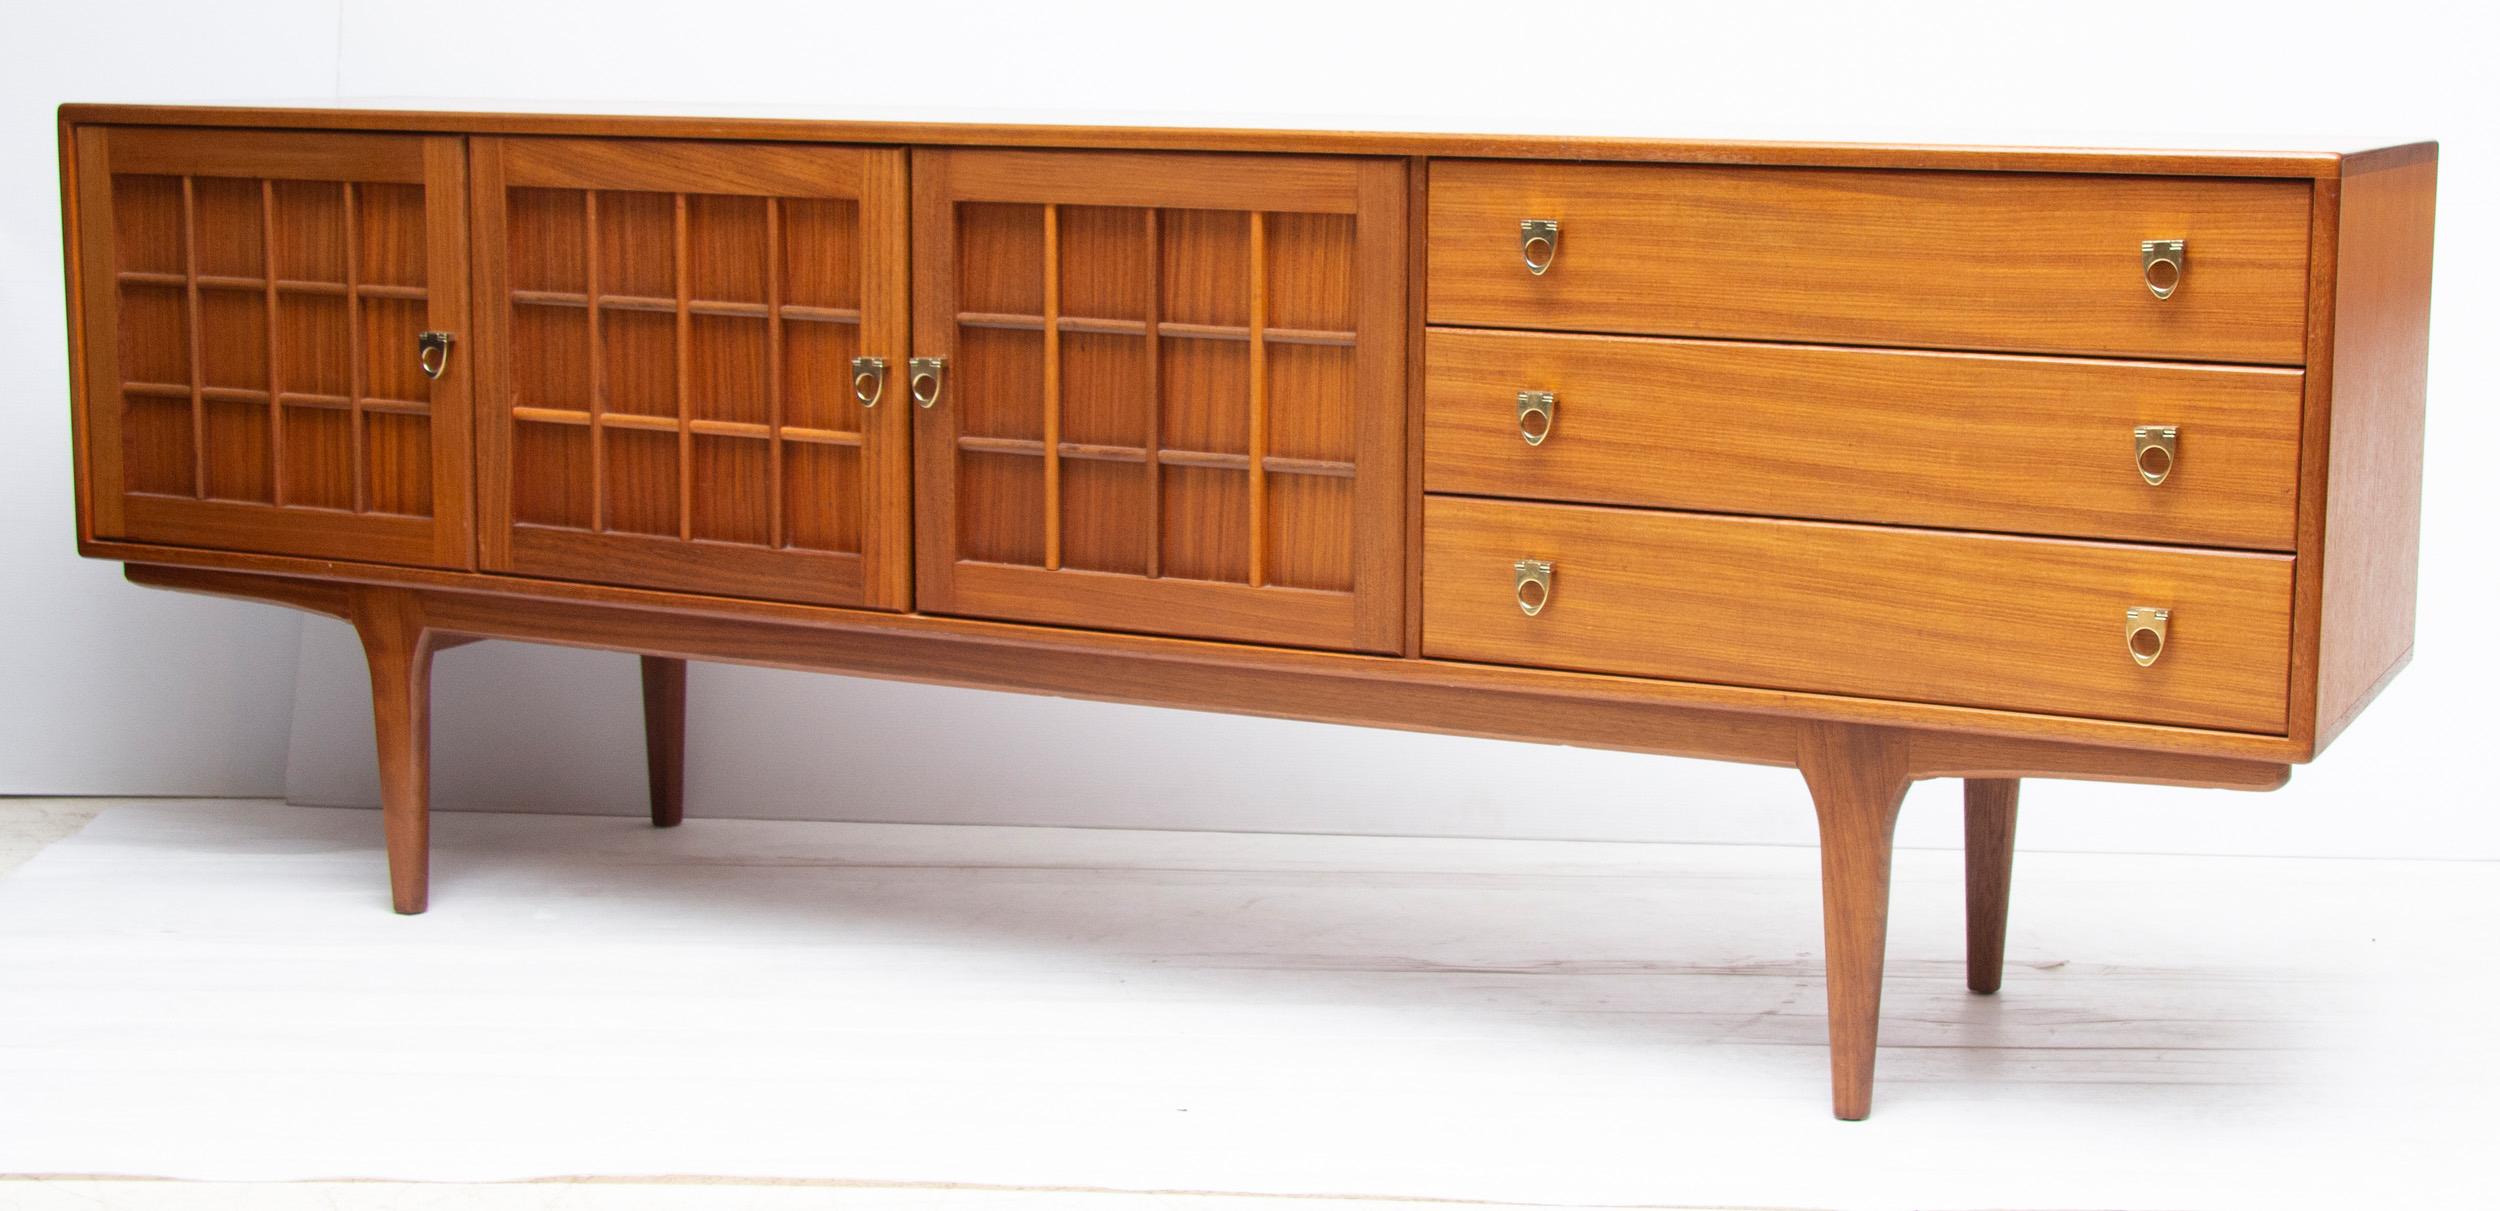 20th Century Midcentury teak sideboard credenza by younger